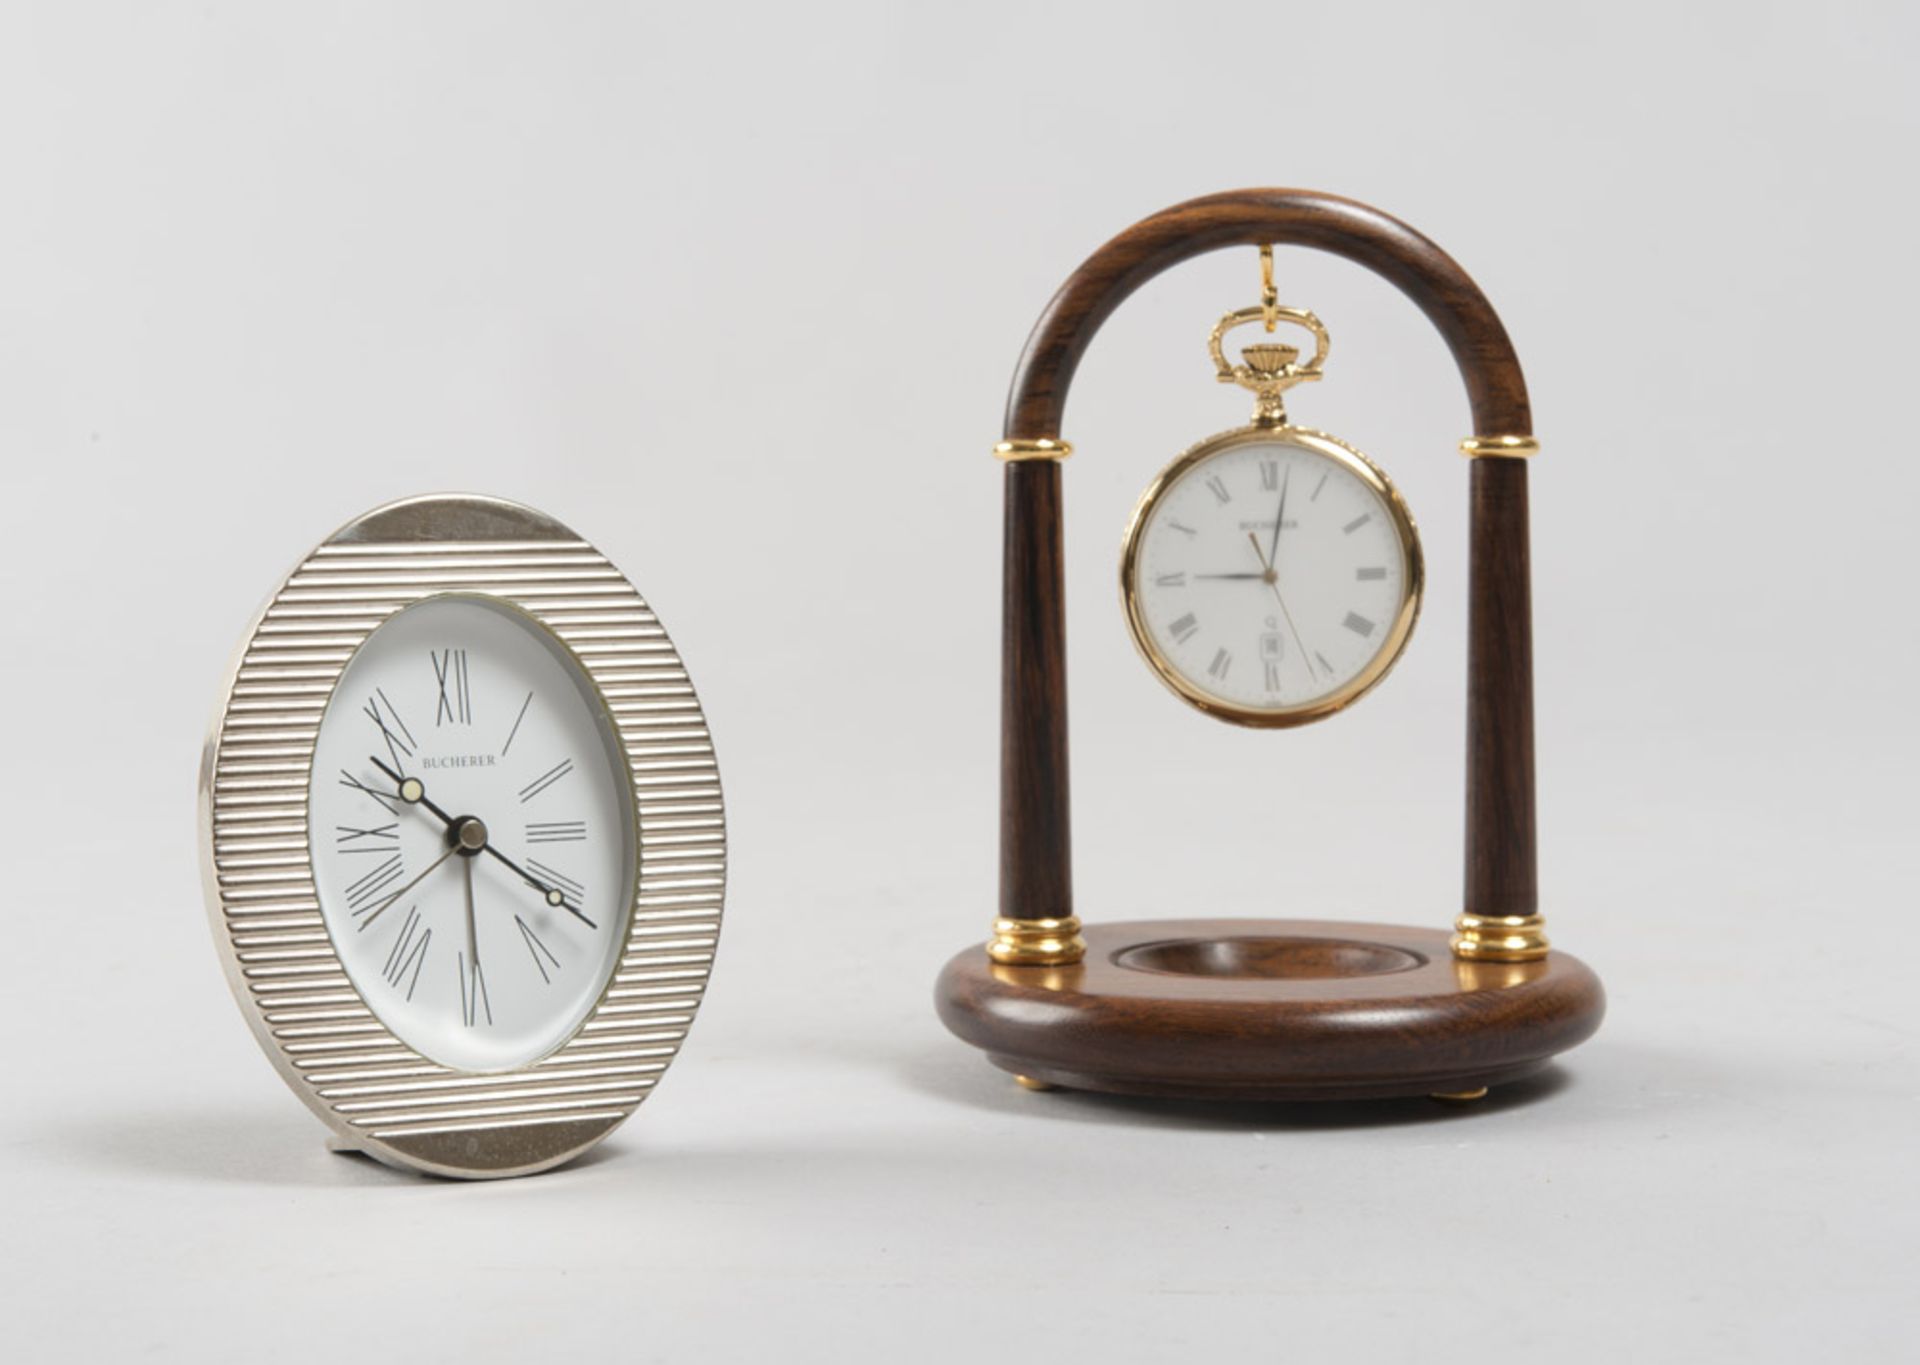 A TABLE CLOCK AND A POCKET WATCH, BRAND BUCHERER silver table clock with oval silver metal case